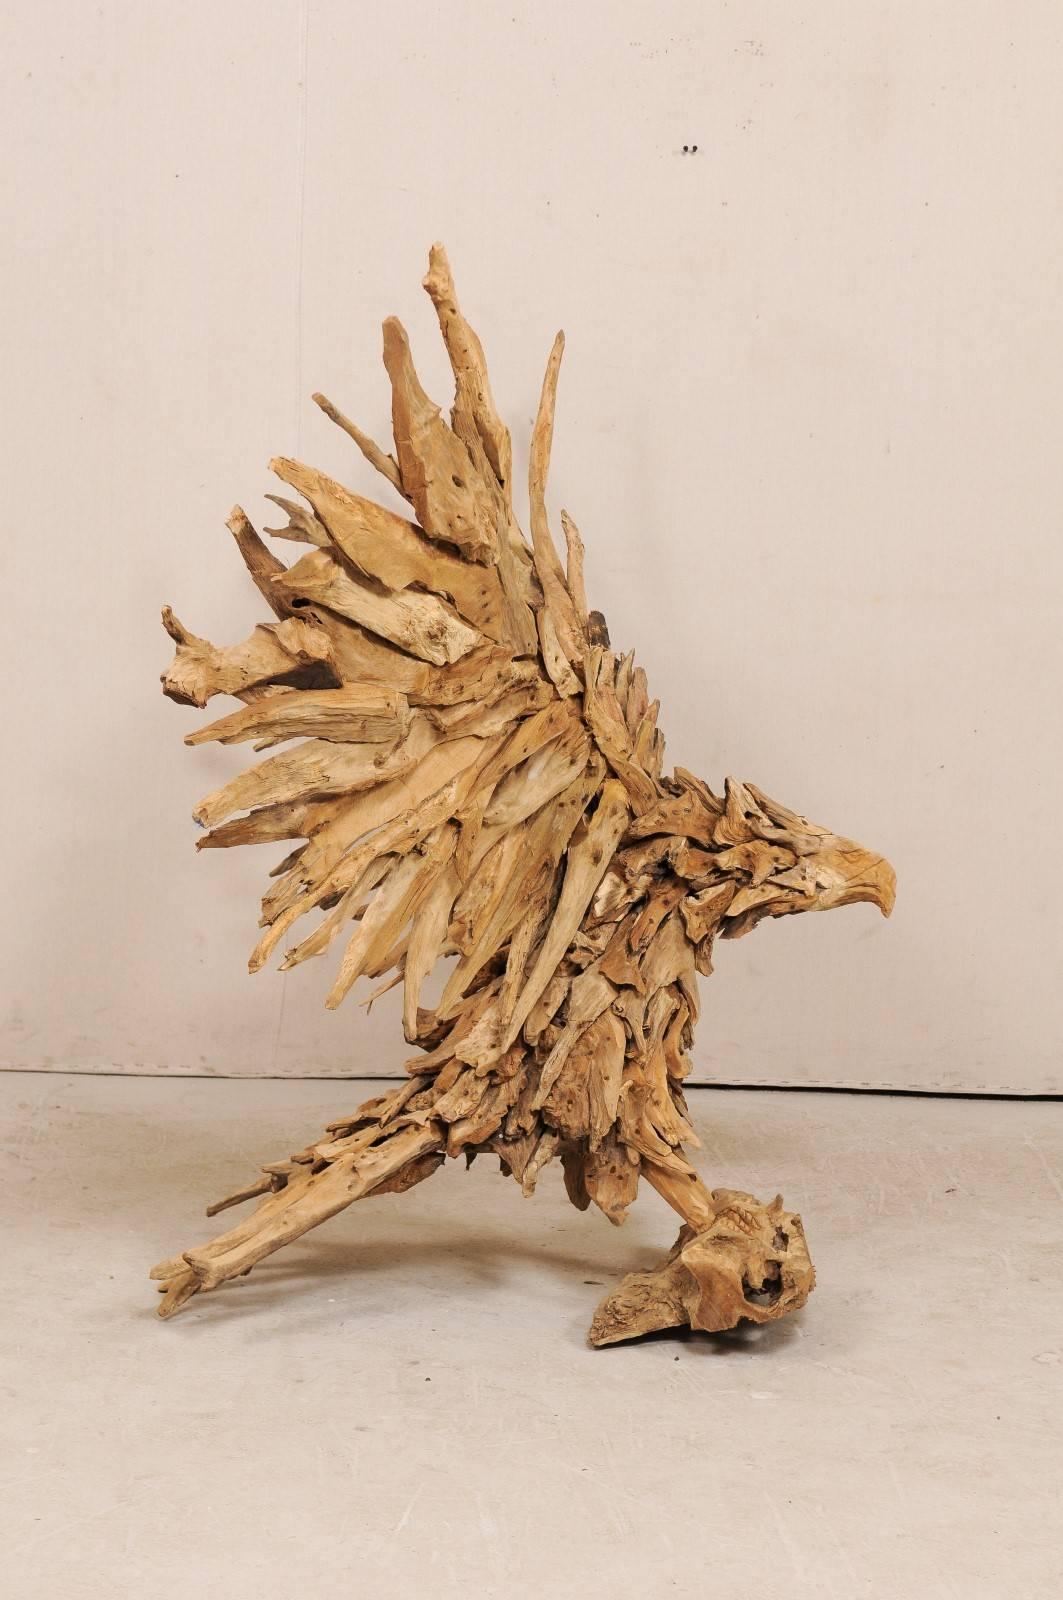  Eagle Sculpture Artisan-Crafted from Driftwood, 4.5 Ft Tall w/ 6+ Ft Wing-Span In Good Condition For Sale In Atlanta, GA